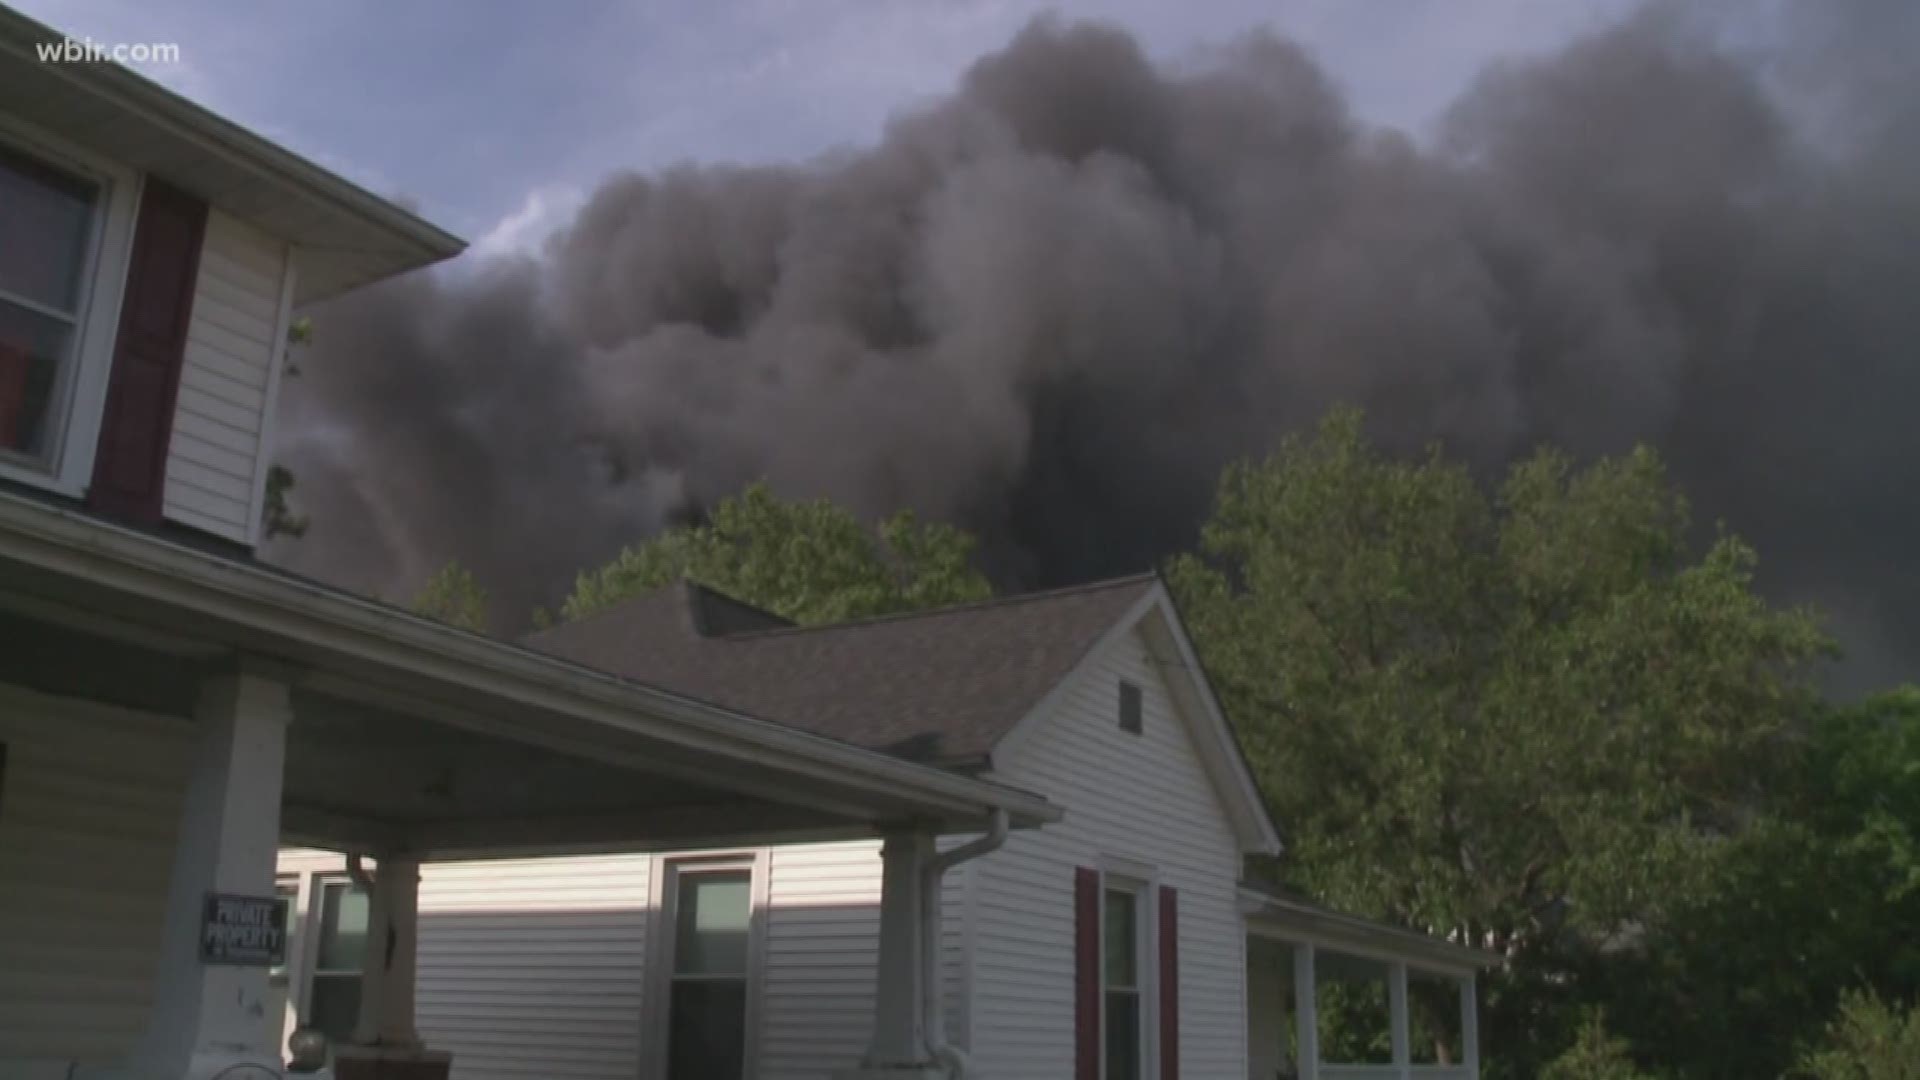 Neighbors in the area spent much of the afternoon watching the plant burn. Many of them were left shocked by the sheer size of the fire and smoke.